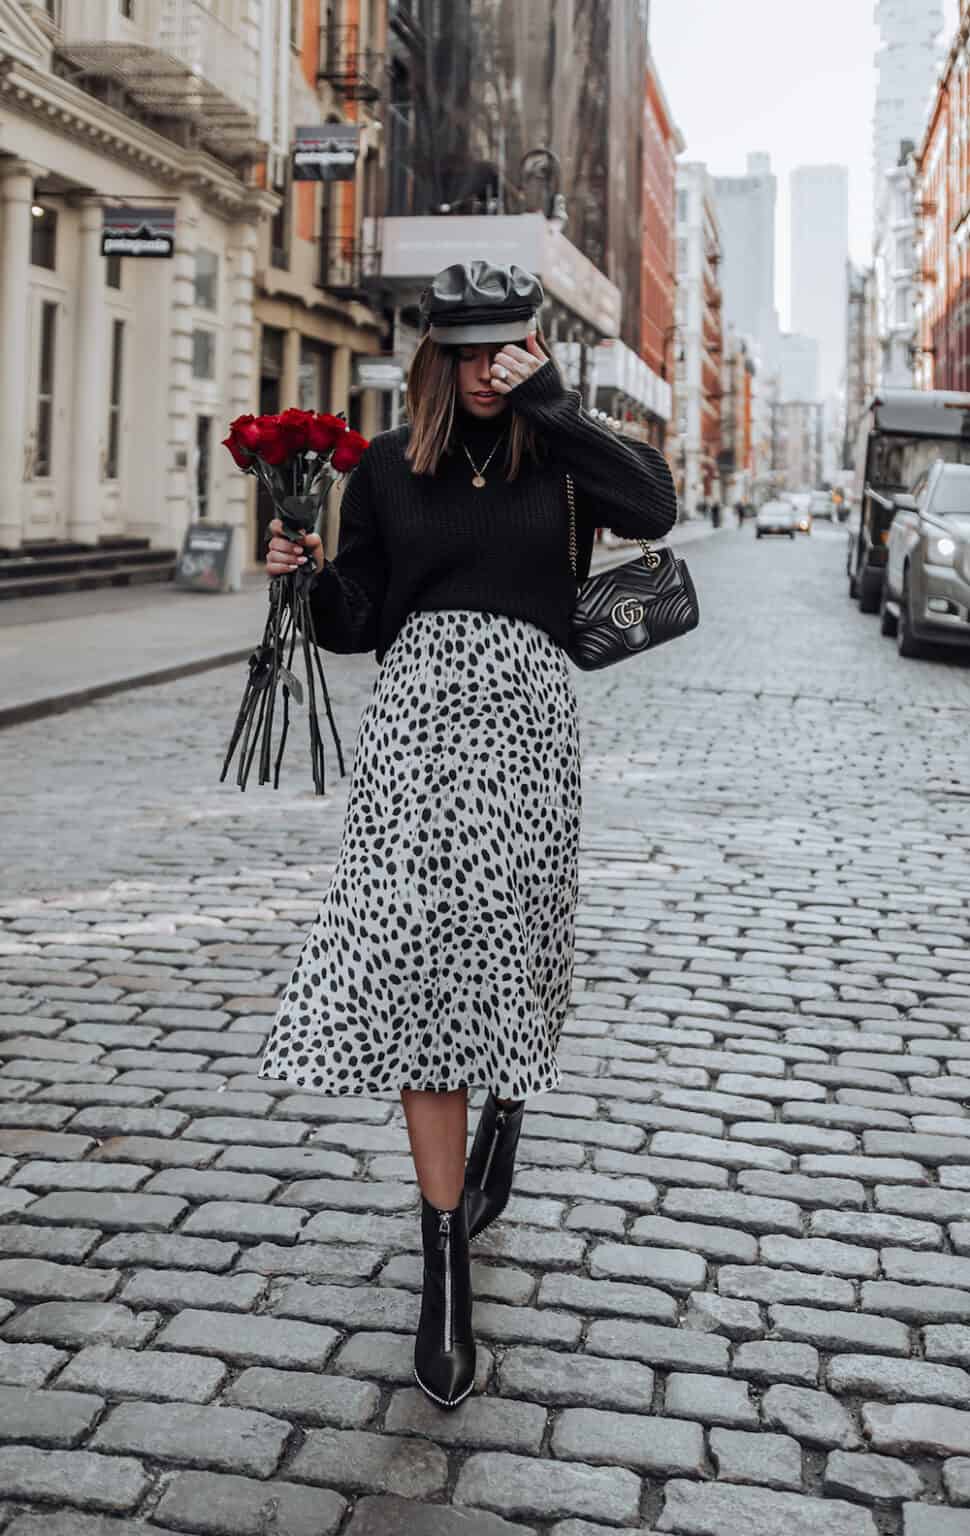 Cheetah Print vs Leopard Print - The Difference + Chic Outfits!